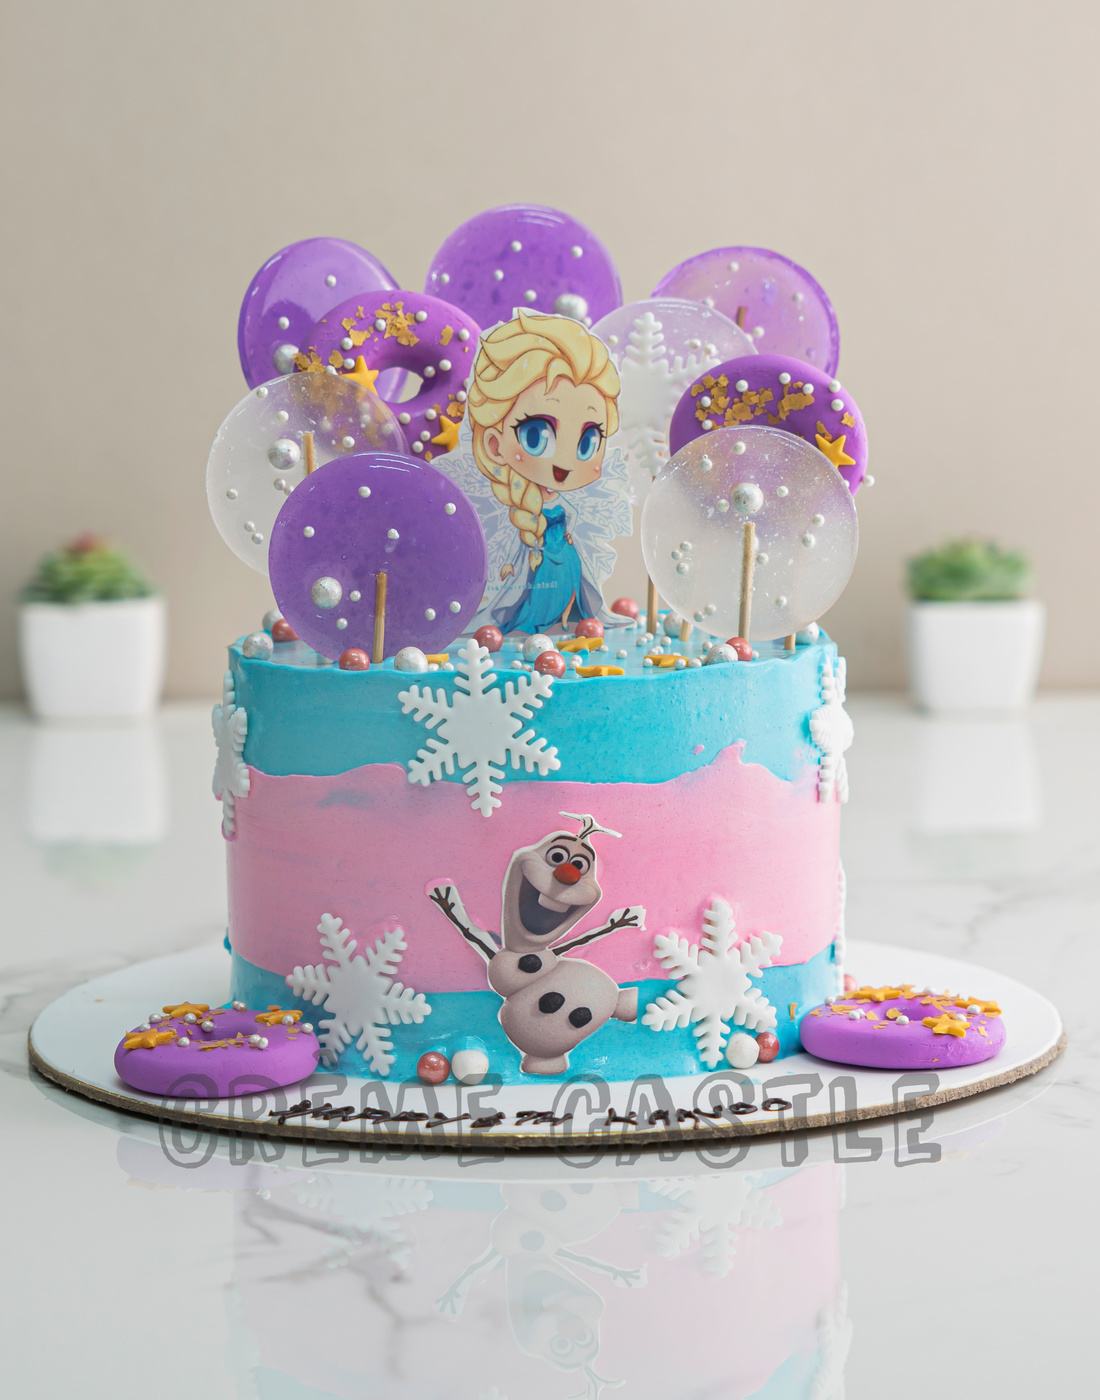 18 Frozen themed birthday cakes which can be customized! - Recommend.my